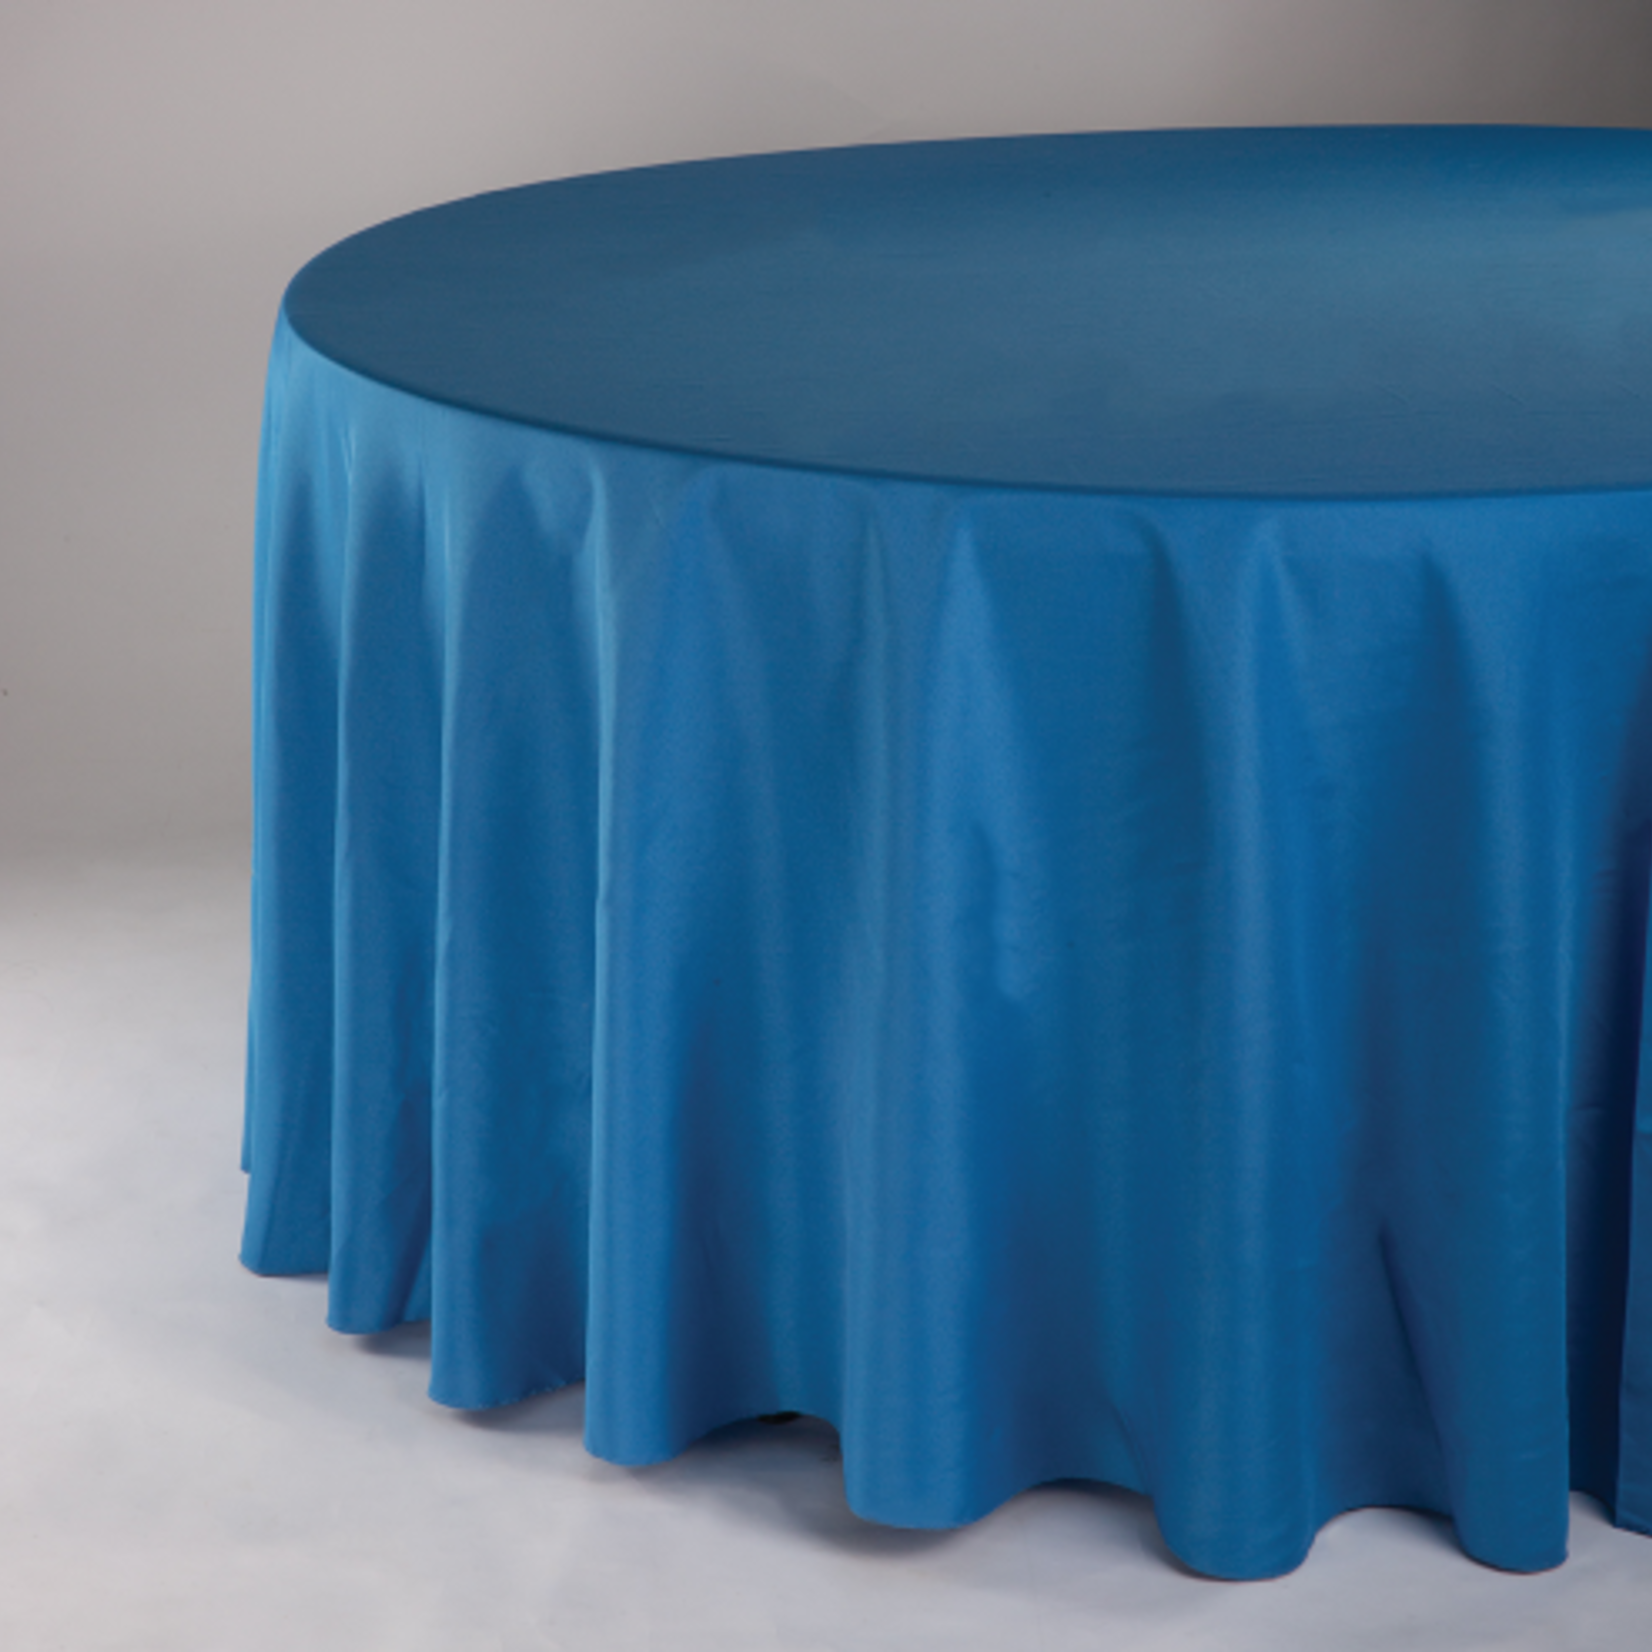 120" ROUND BLUE TABLECLOTH